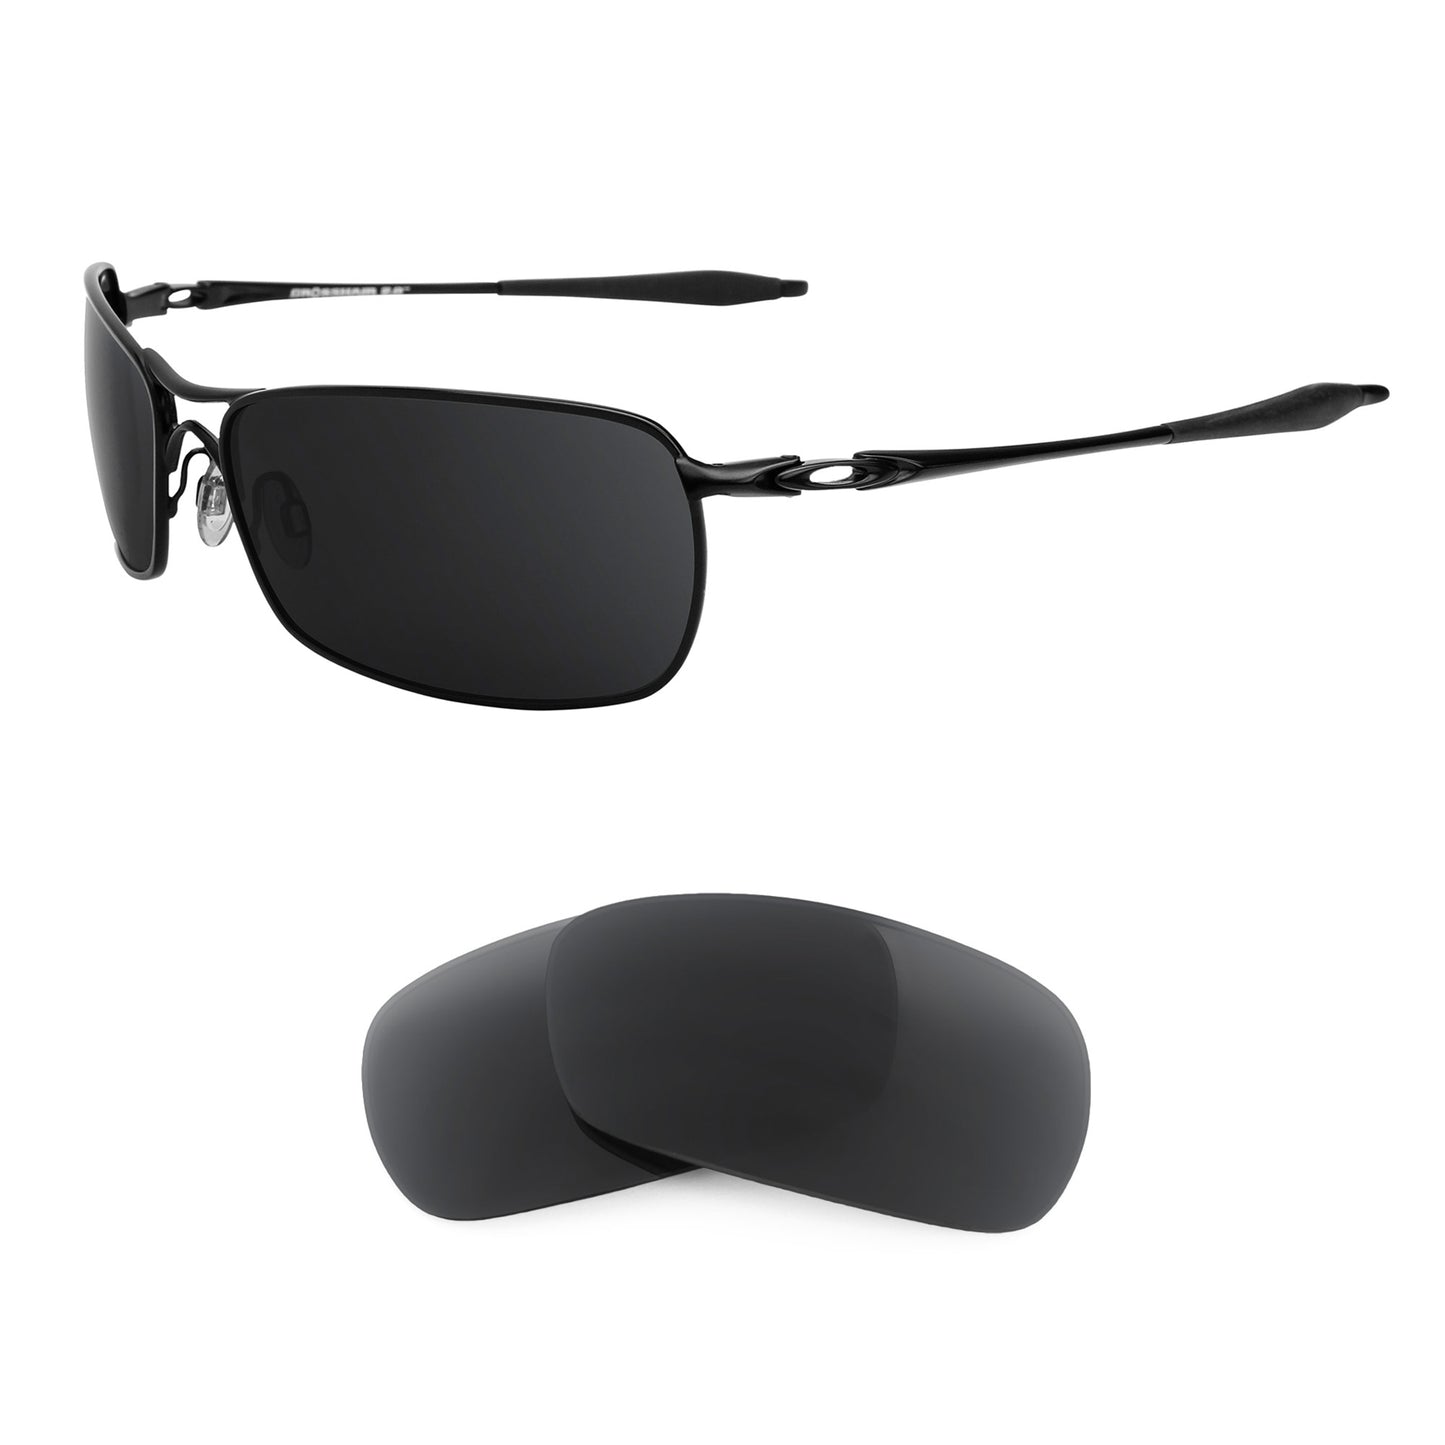 Oakley Crosshair 2.0 sunglasses with replacement lenses